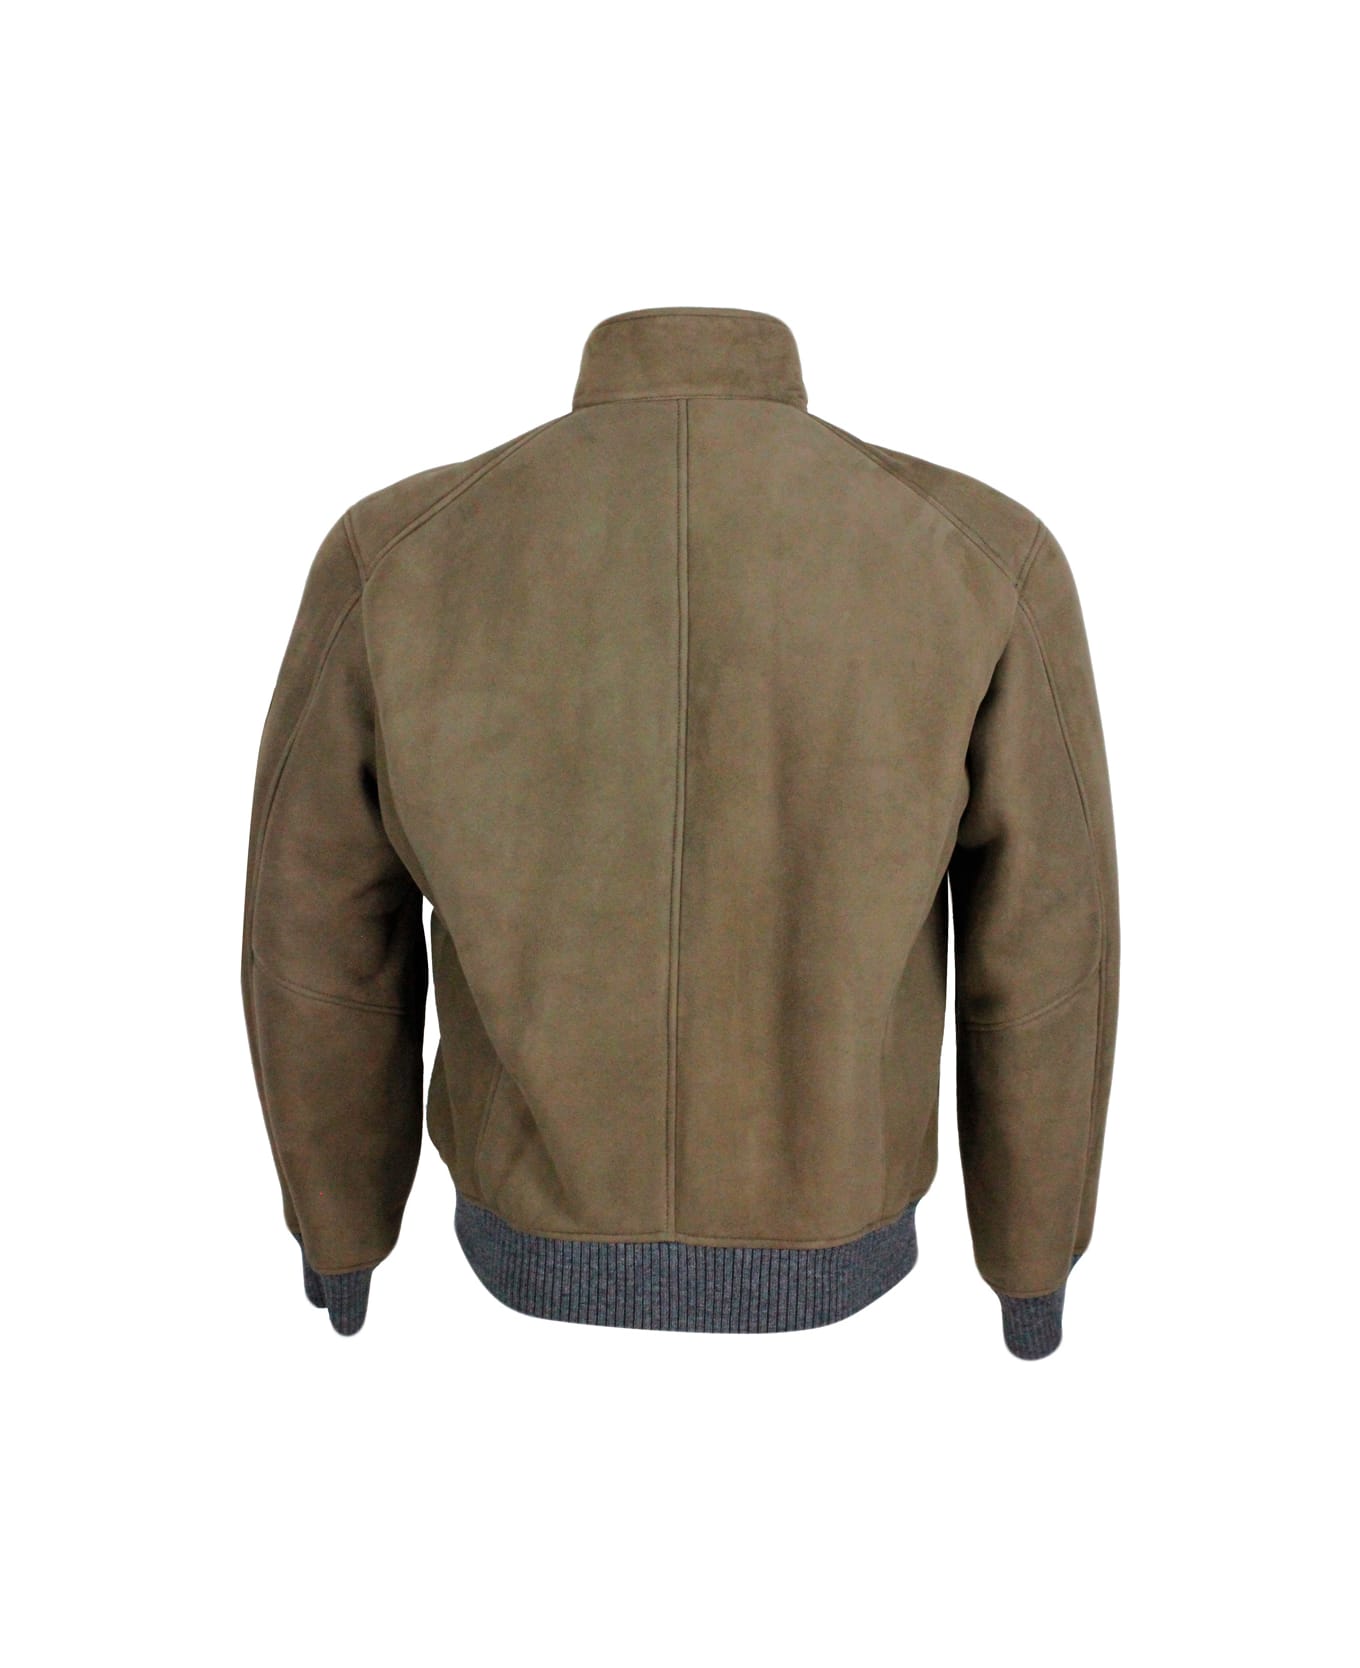 Barba Napoli Bomber Jacket In Fine And Soft Shearling Sheepskin With Stretch Knit Trims And Zip Closure. Front Pockets - Taupe